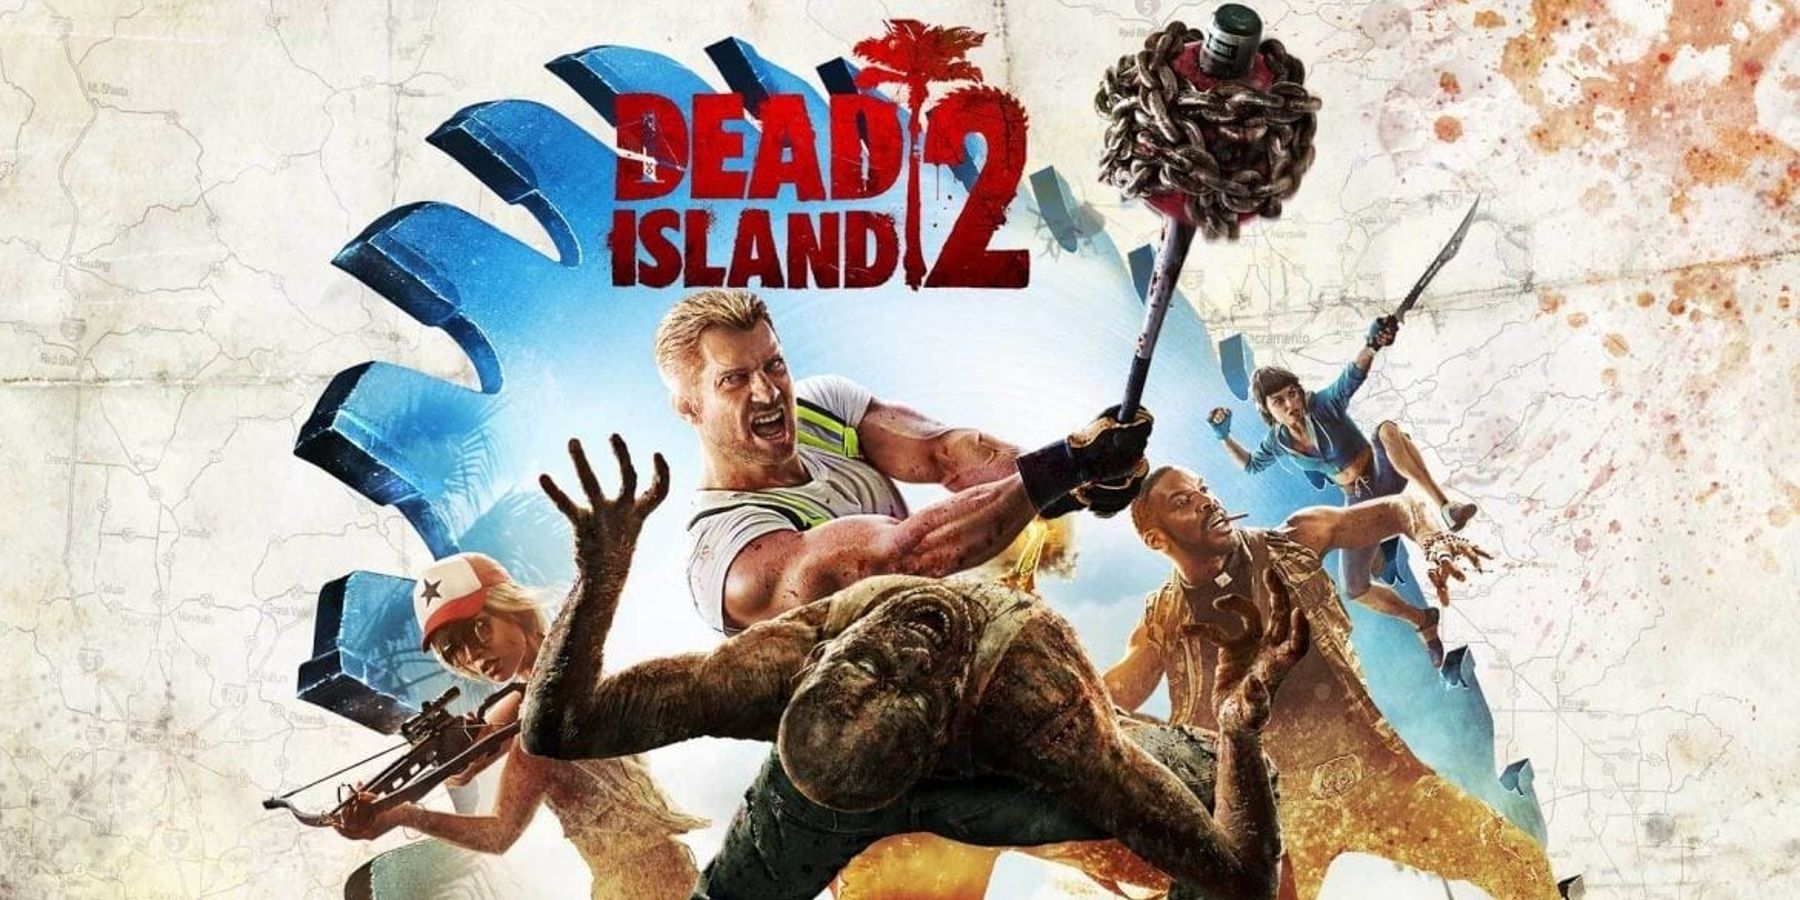 Dead Island 2 Gameplay Trailer Shows Off Weapons, Enemies, And